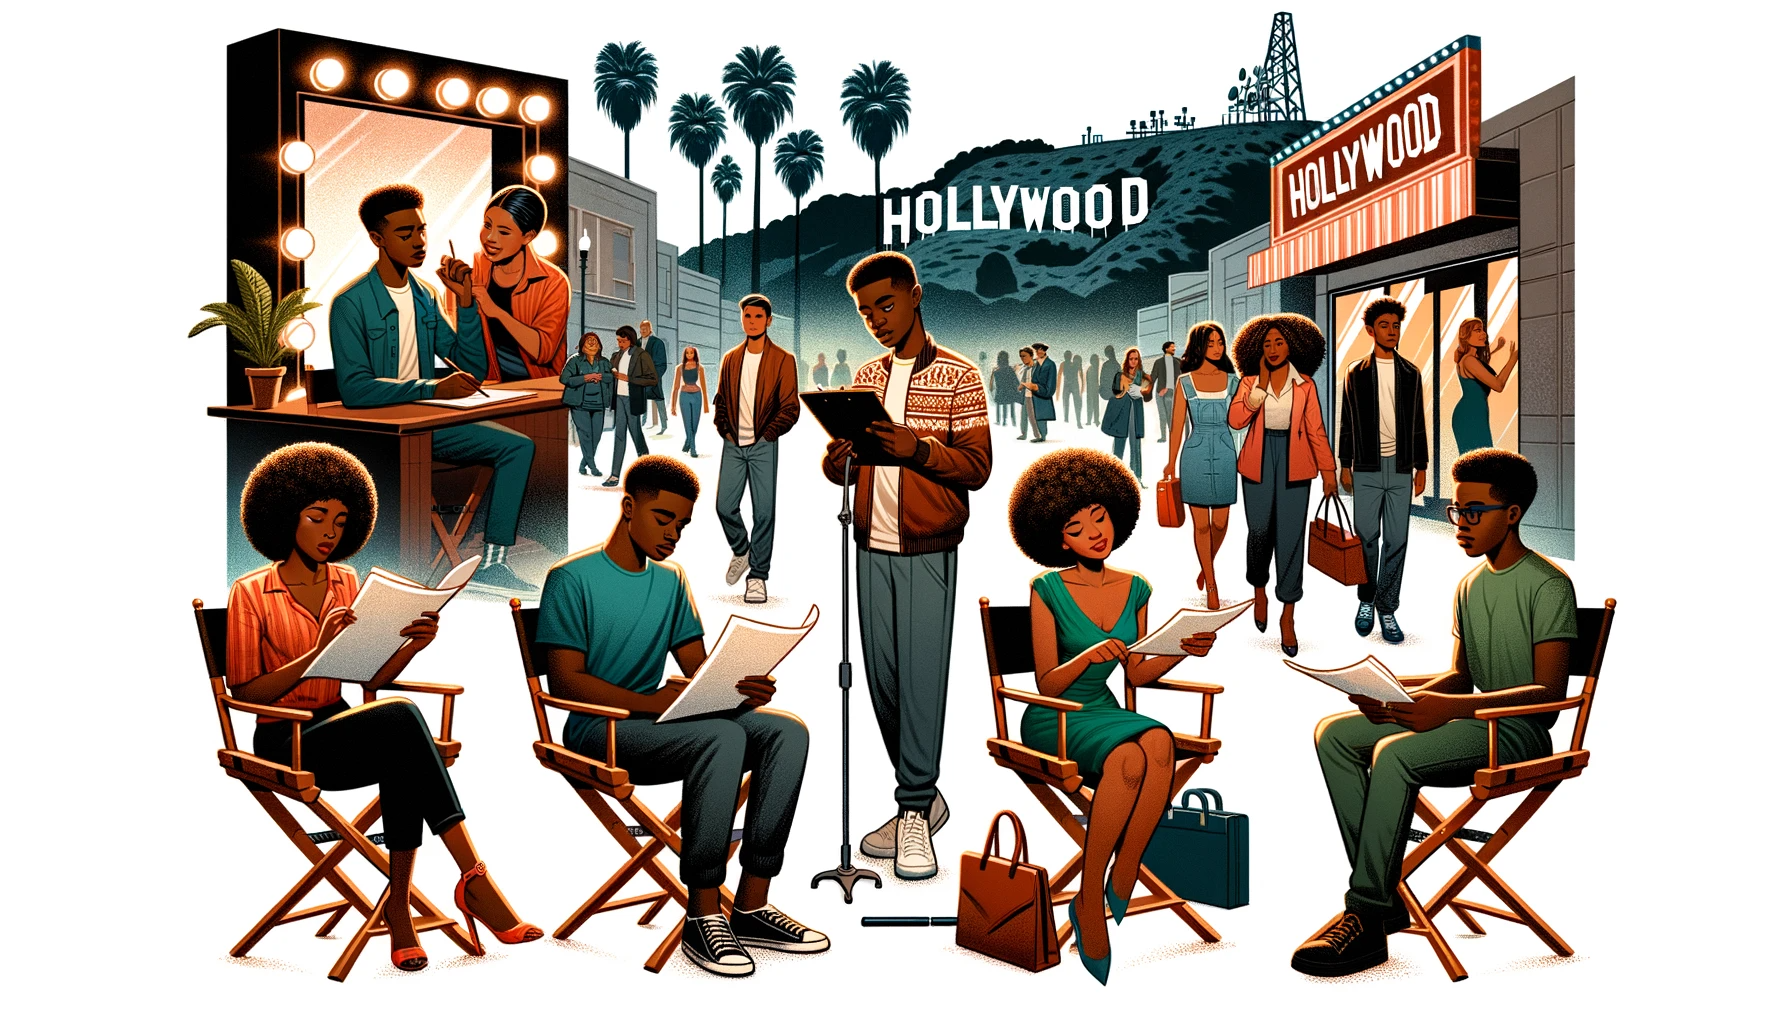 Rising Stars: Young Black Actors Making Their Mark in Hollywood